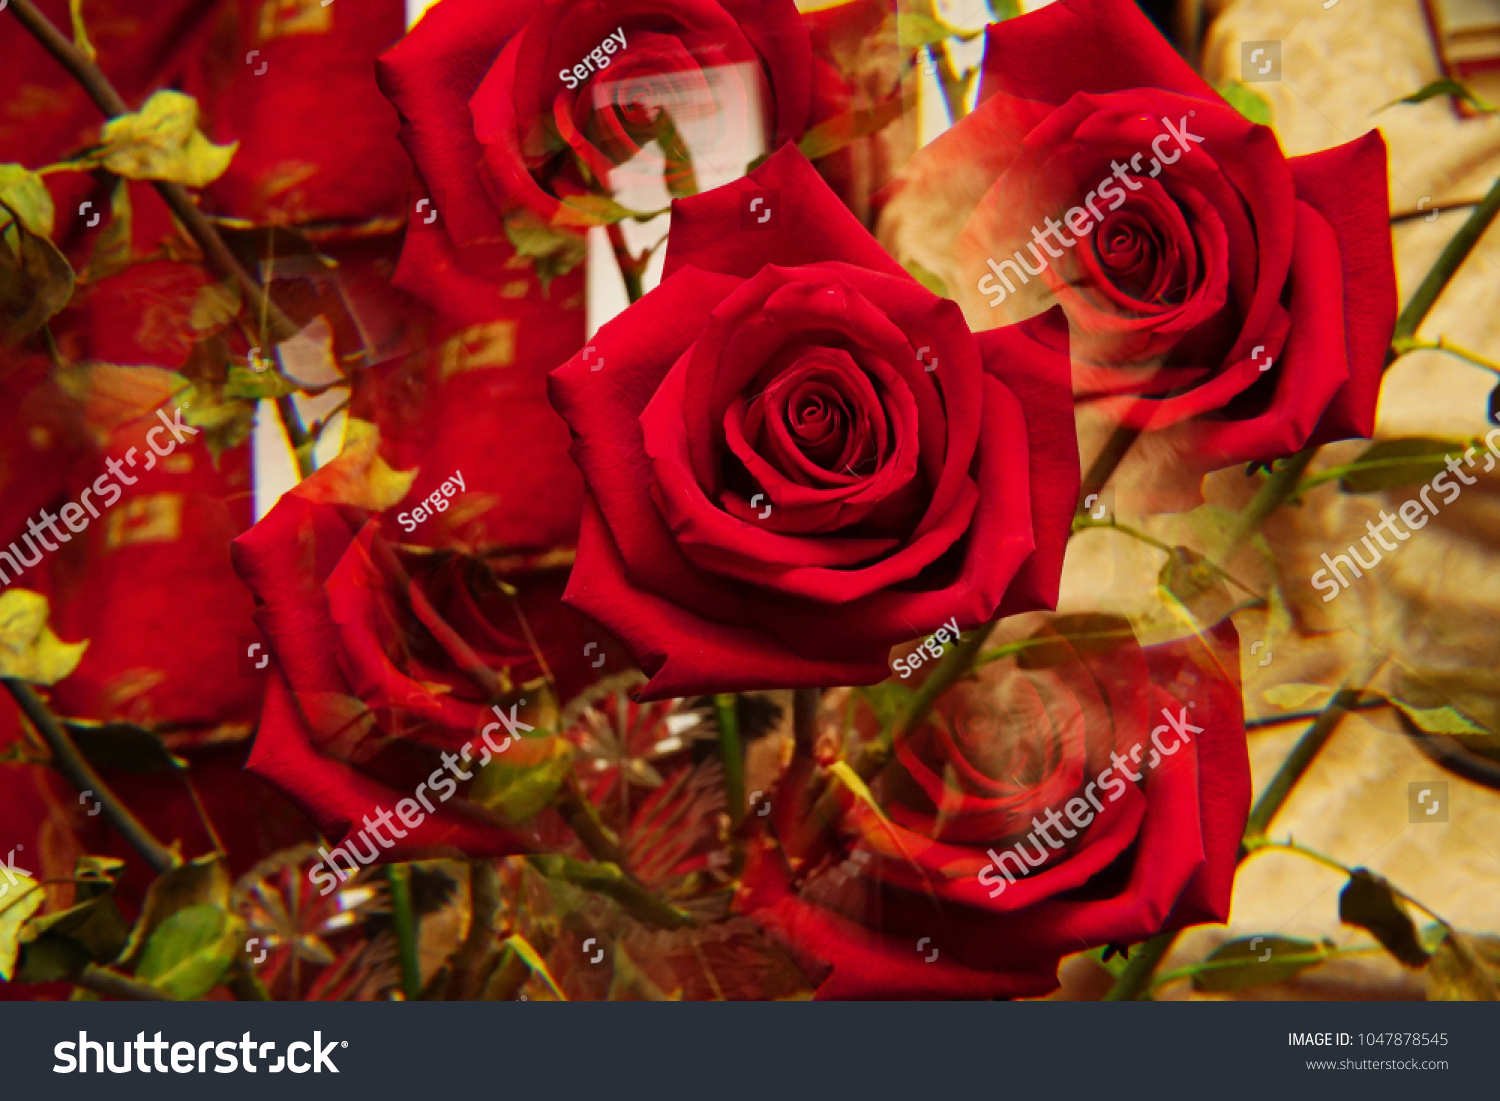 Close-up of the inflorescences of the red rose "Niccolo Paganini" with twisted petals in five sectional reflections standing in a crystal vase                                #1047878545